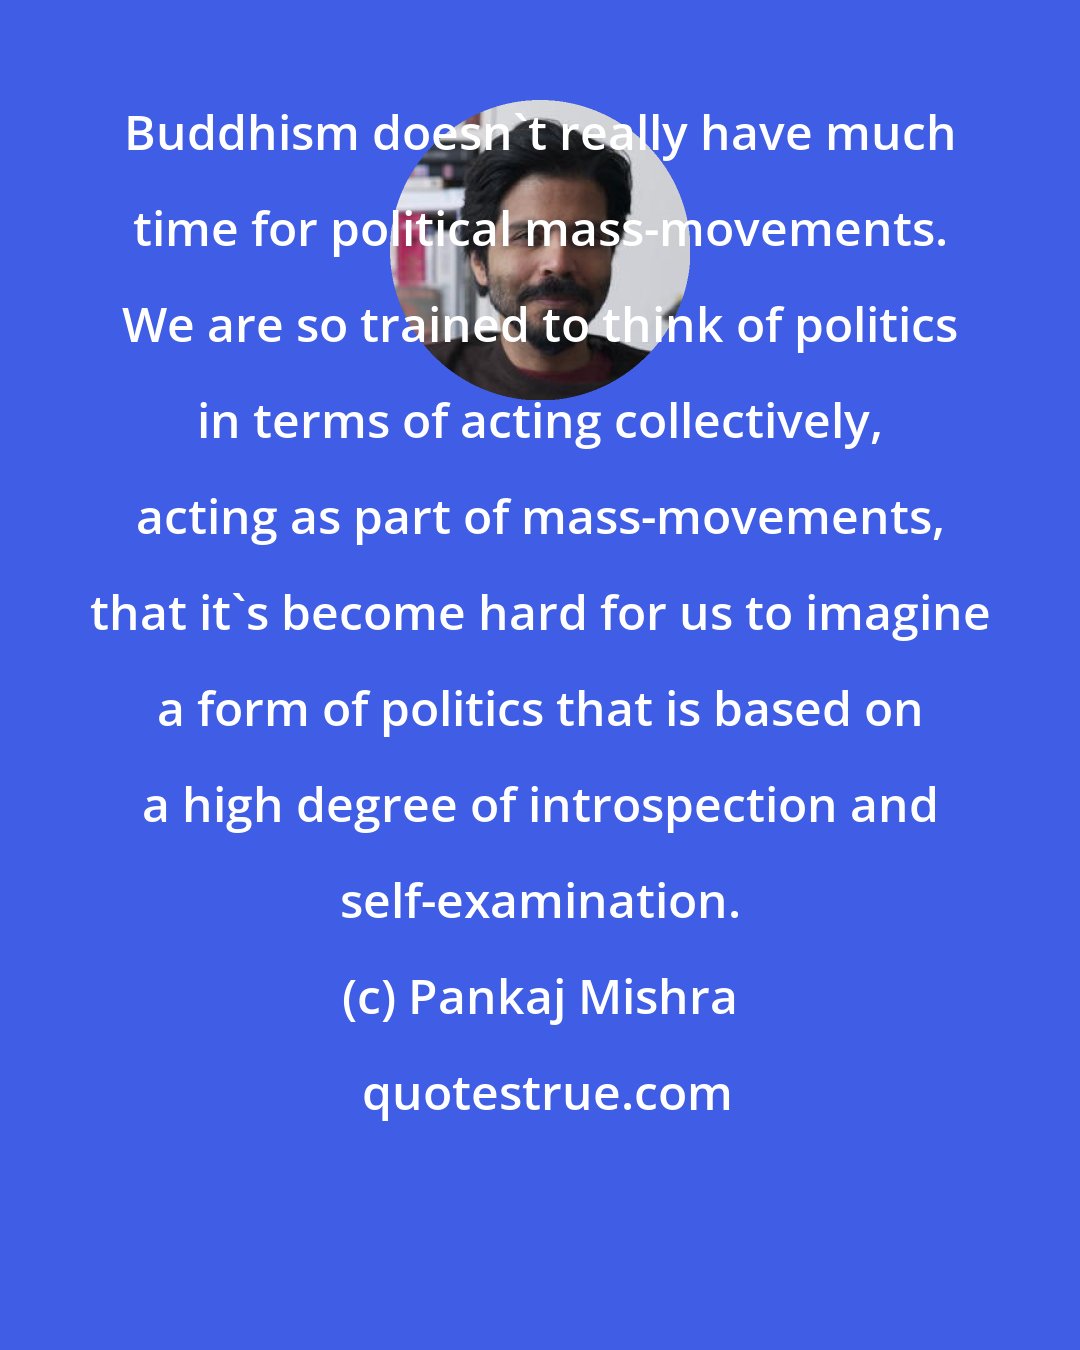 Pankaj Mishra: Buddhism doesn't really have much time for political mass-movements. We are so trained to think of politics in terms of acting collectively, acting as part of mass-movements, that it's become hard for us to imagine a form of politics that is based on a high degree of introspection and self-examination.